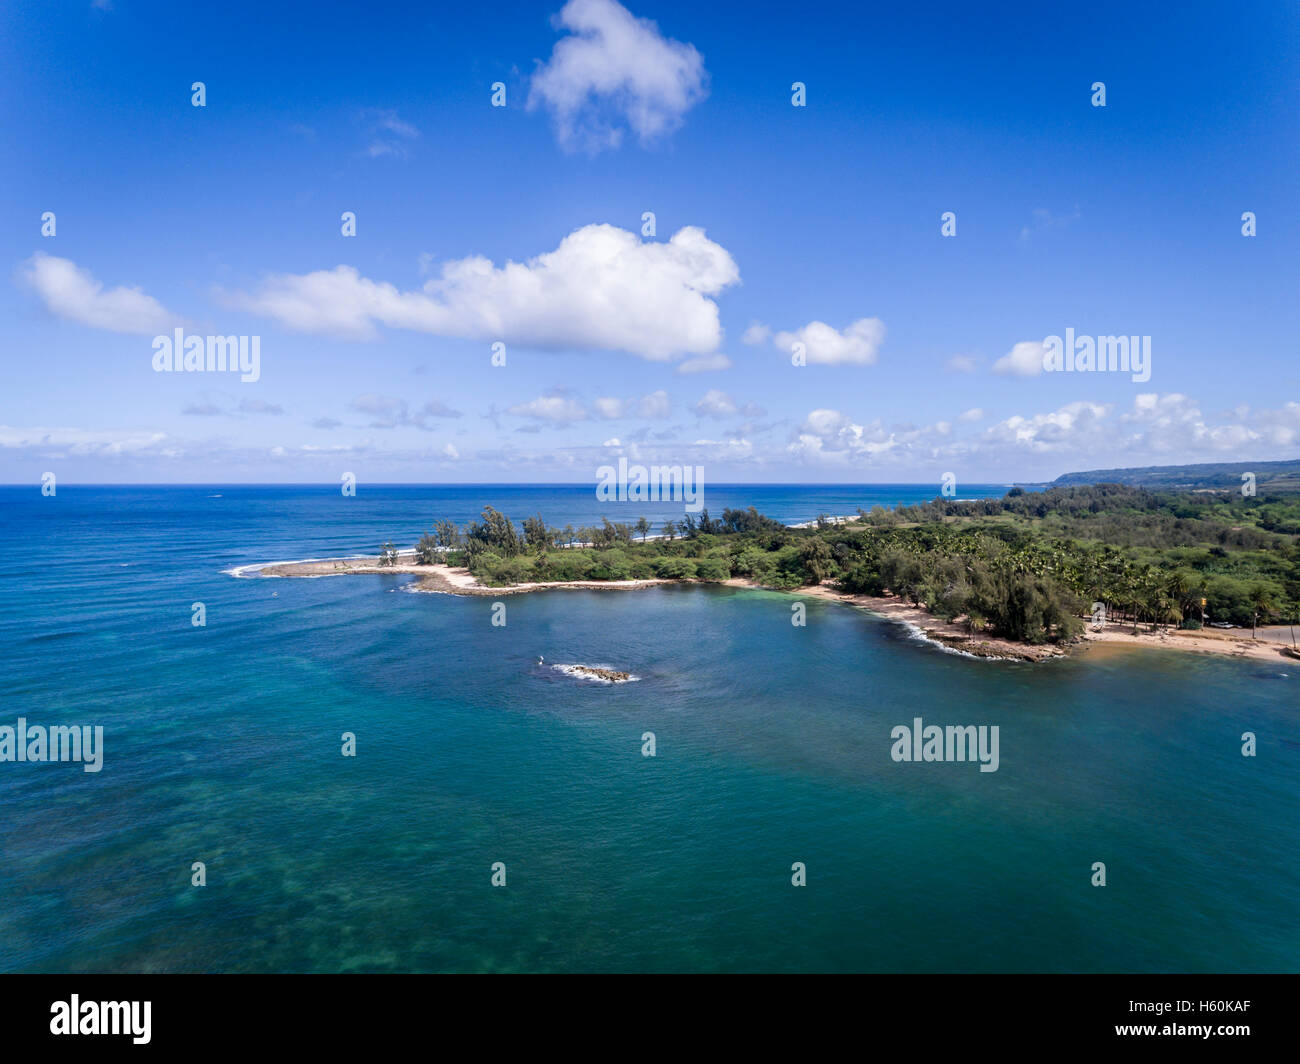 Aerial view of the Ocean and Beaches in Hale'iwa on the north shore of ...